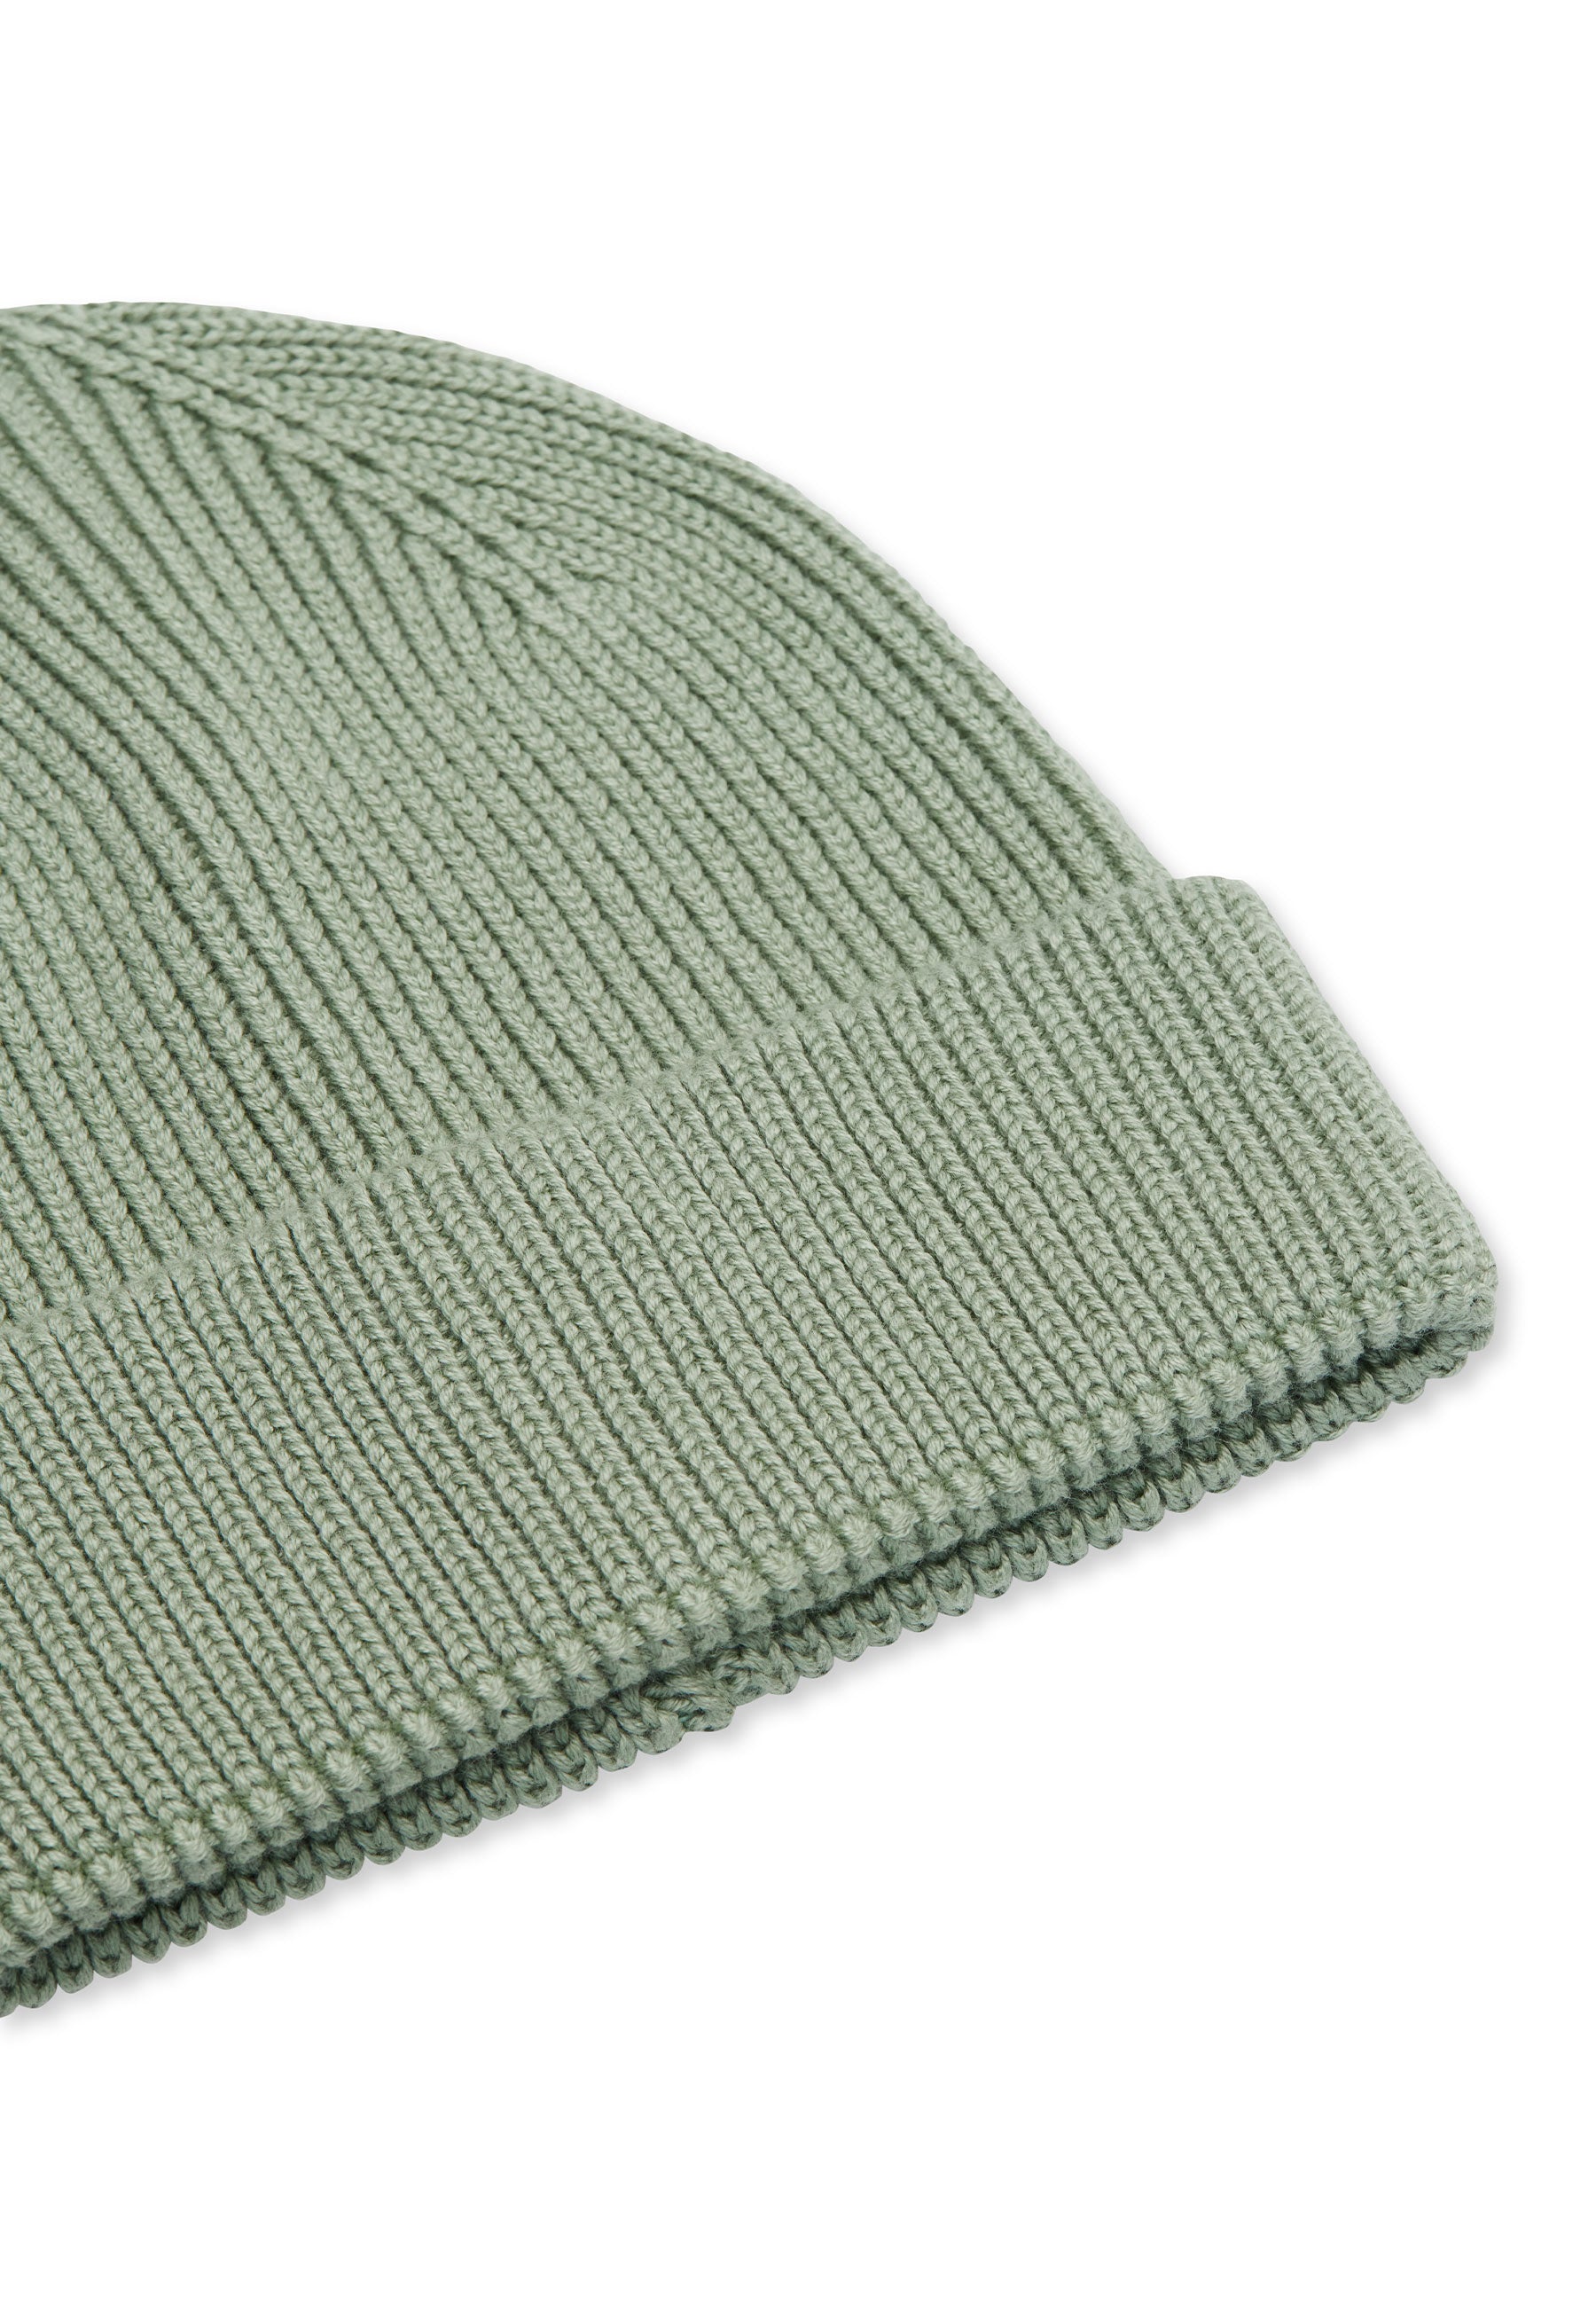 WMHENRY BEANIE in Cameo Green